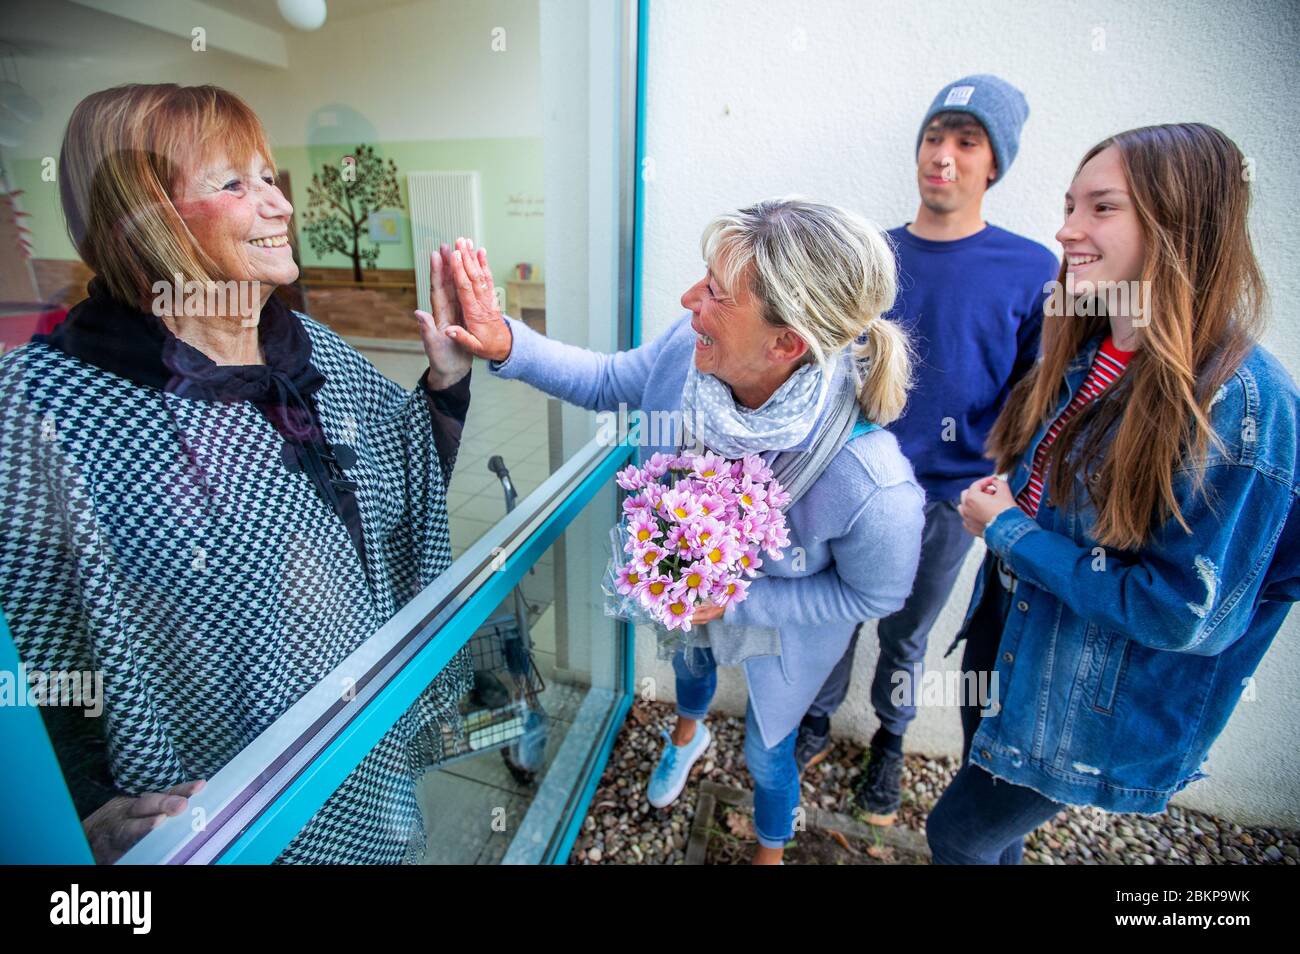 Schwerin, Germany. 05th May, 2020. Anne-Katrin Lampe, with a bouquet of flowers and her children Marty and Juliane, visits her 80-year-old mother Bärbel Prütz at the AWO senior citizens' home in Schelfwerder, which is closed to visitors because of the corona crisis, and holds her hand against a window pane. The family regularly visits the resident of the nursing home and waves to each other through the large window on the ground floor. Credit: Jens Büttner/dpa-Zentralbild/dpa/Alamy Live News Stock Photo